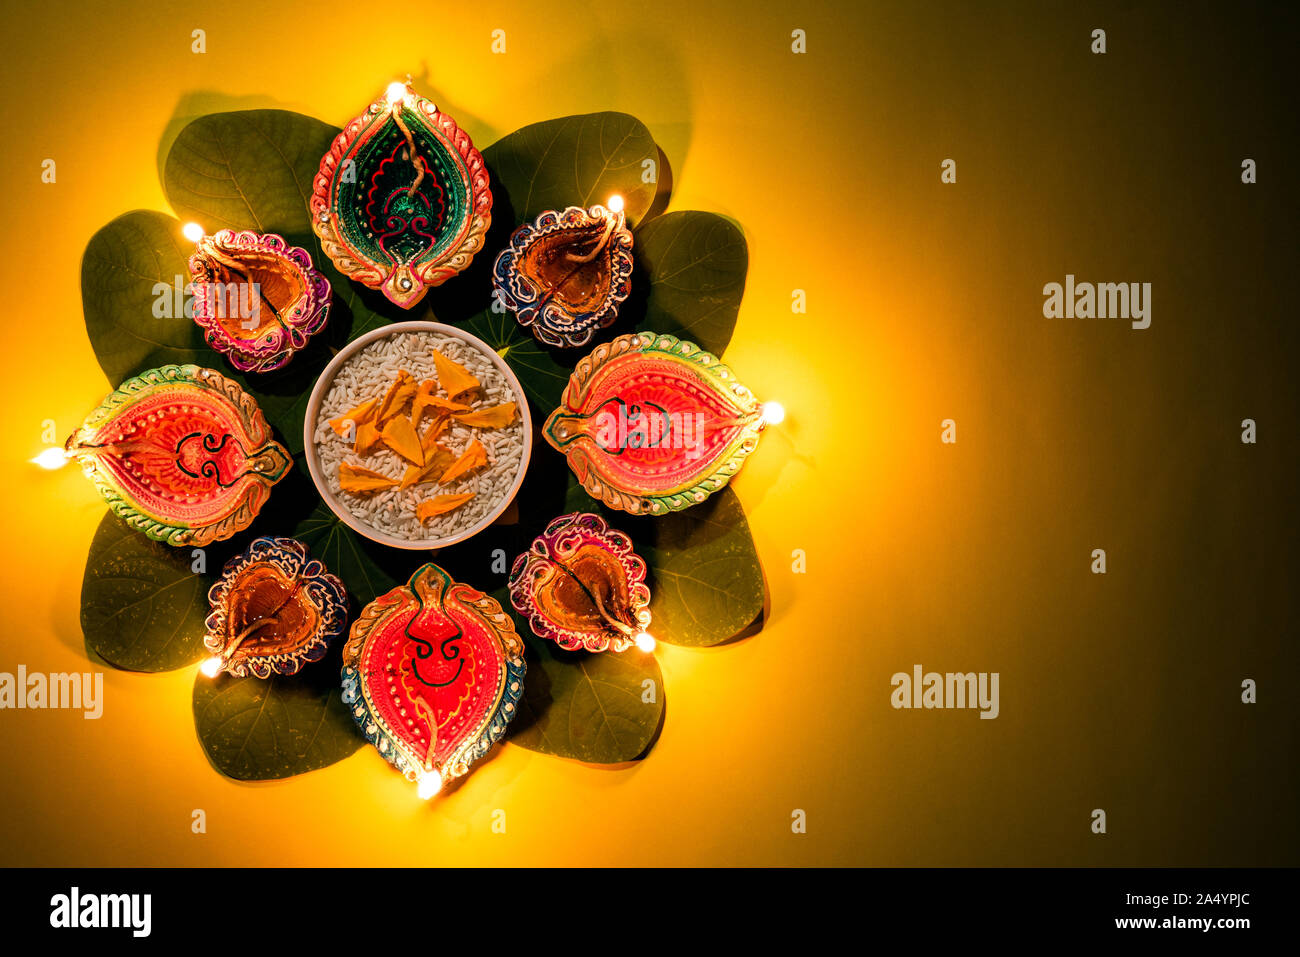 Happy Dussehra. Clay Diya lamps lit during Dussehra with yellow flowers, green leaf and rice on yellow pastel background. Dussehra Indian Festival con Stock Photo